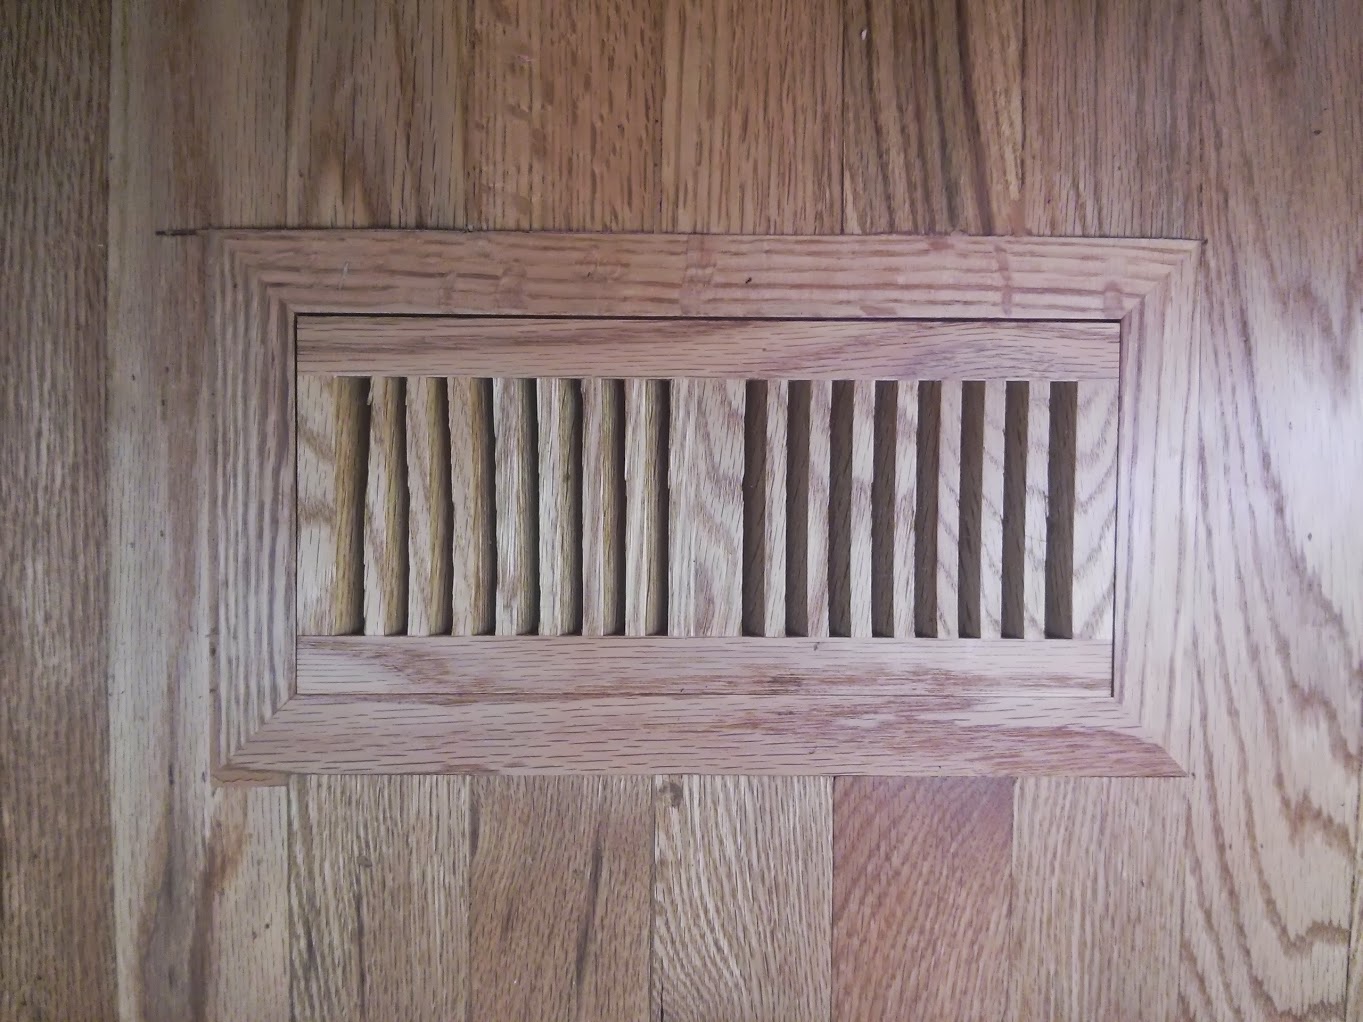 A new flush mount oak floor vent.  Cut and inlaid the floor vent into an existing hardwood floor.  Sanded flush with the floor and and finished.